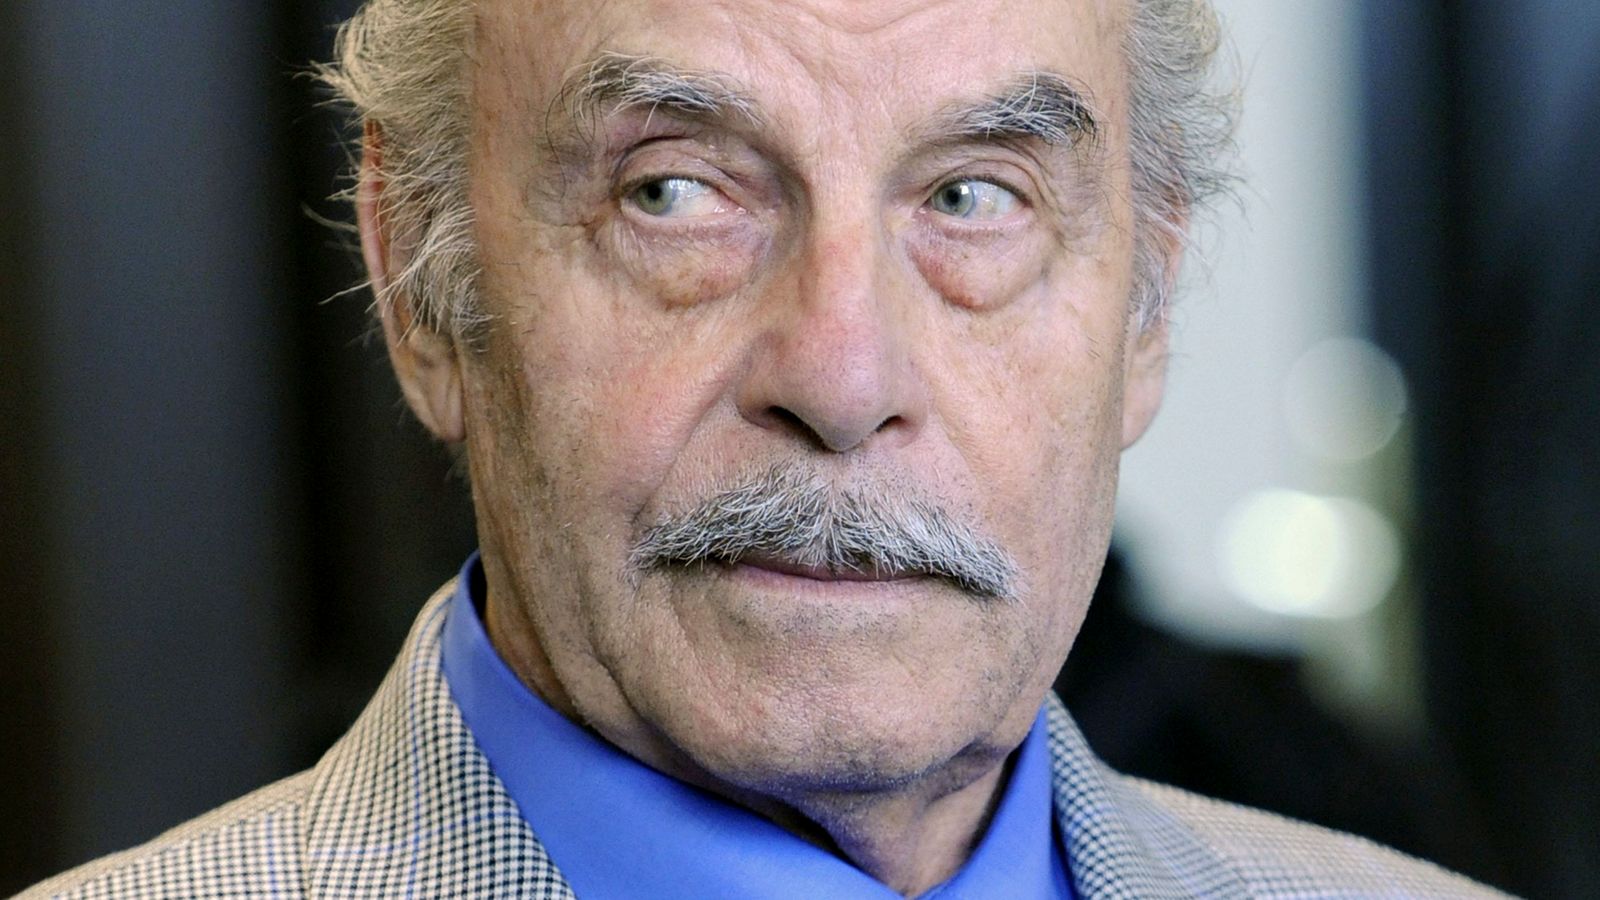 Josef Fritzl can be released to regular prison, court rules - in move that paves way for nursing home transfer